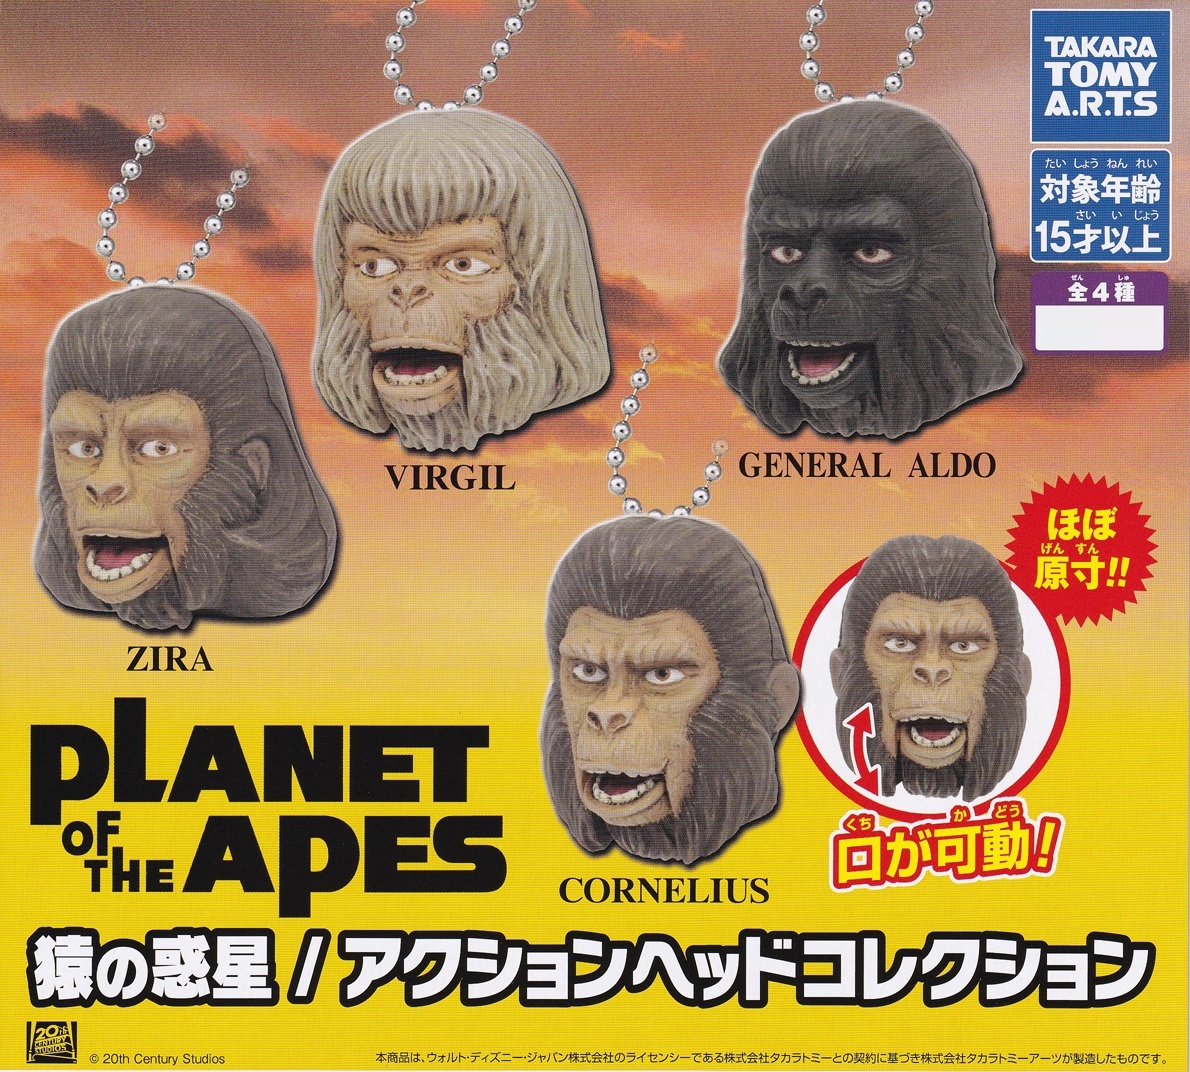  Planet of the Apes action head collection all 4 kind set PLANET OF THE APES figure CORNELIUS ZIRA VIRGIL GENERAL ALDO